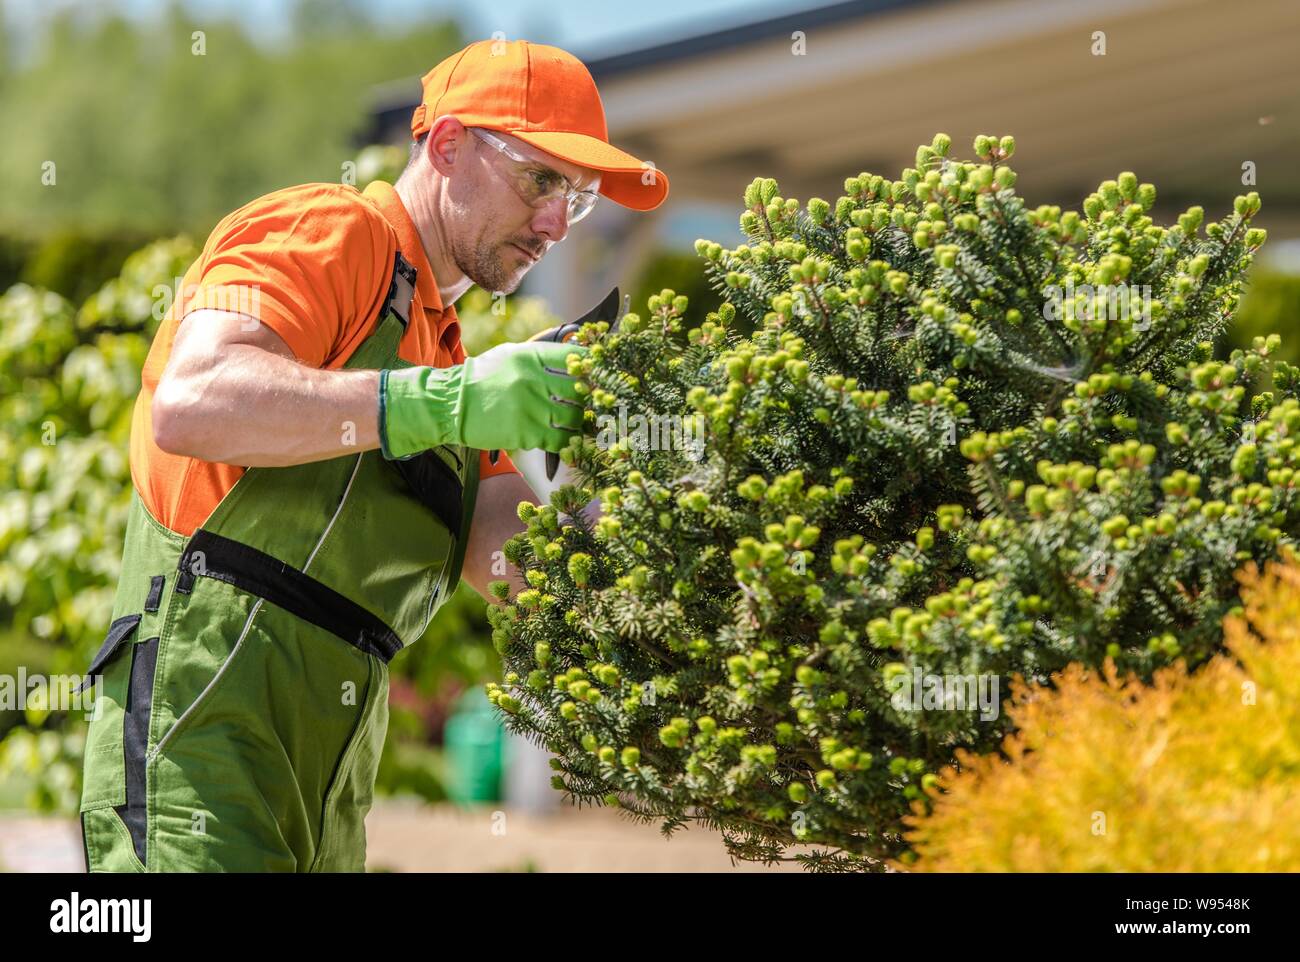 Gardener in His 30s Taking Care of Decorative Garden Trees. Landscaping Industry. Stock Photo